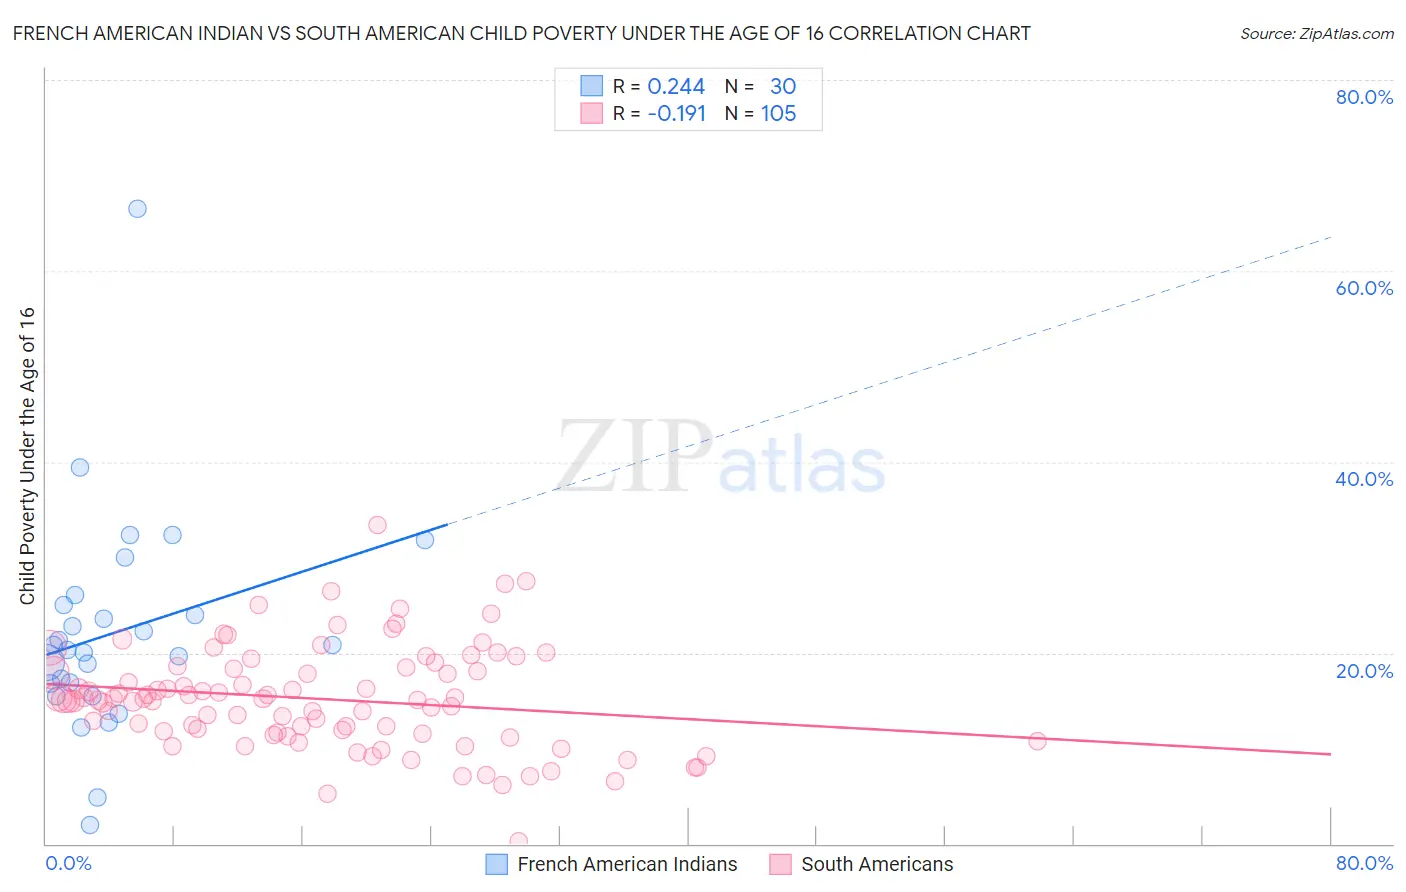 French American Indian vs South American Child Poverty Under the Age of 16